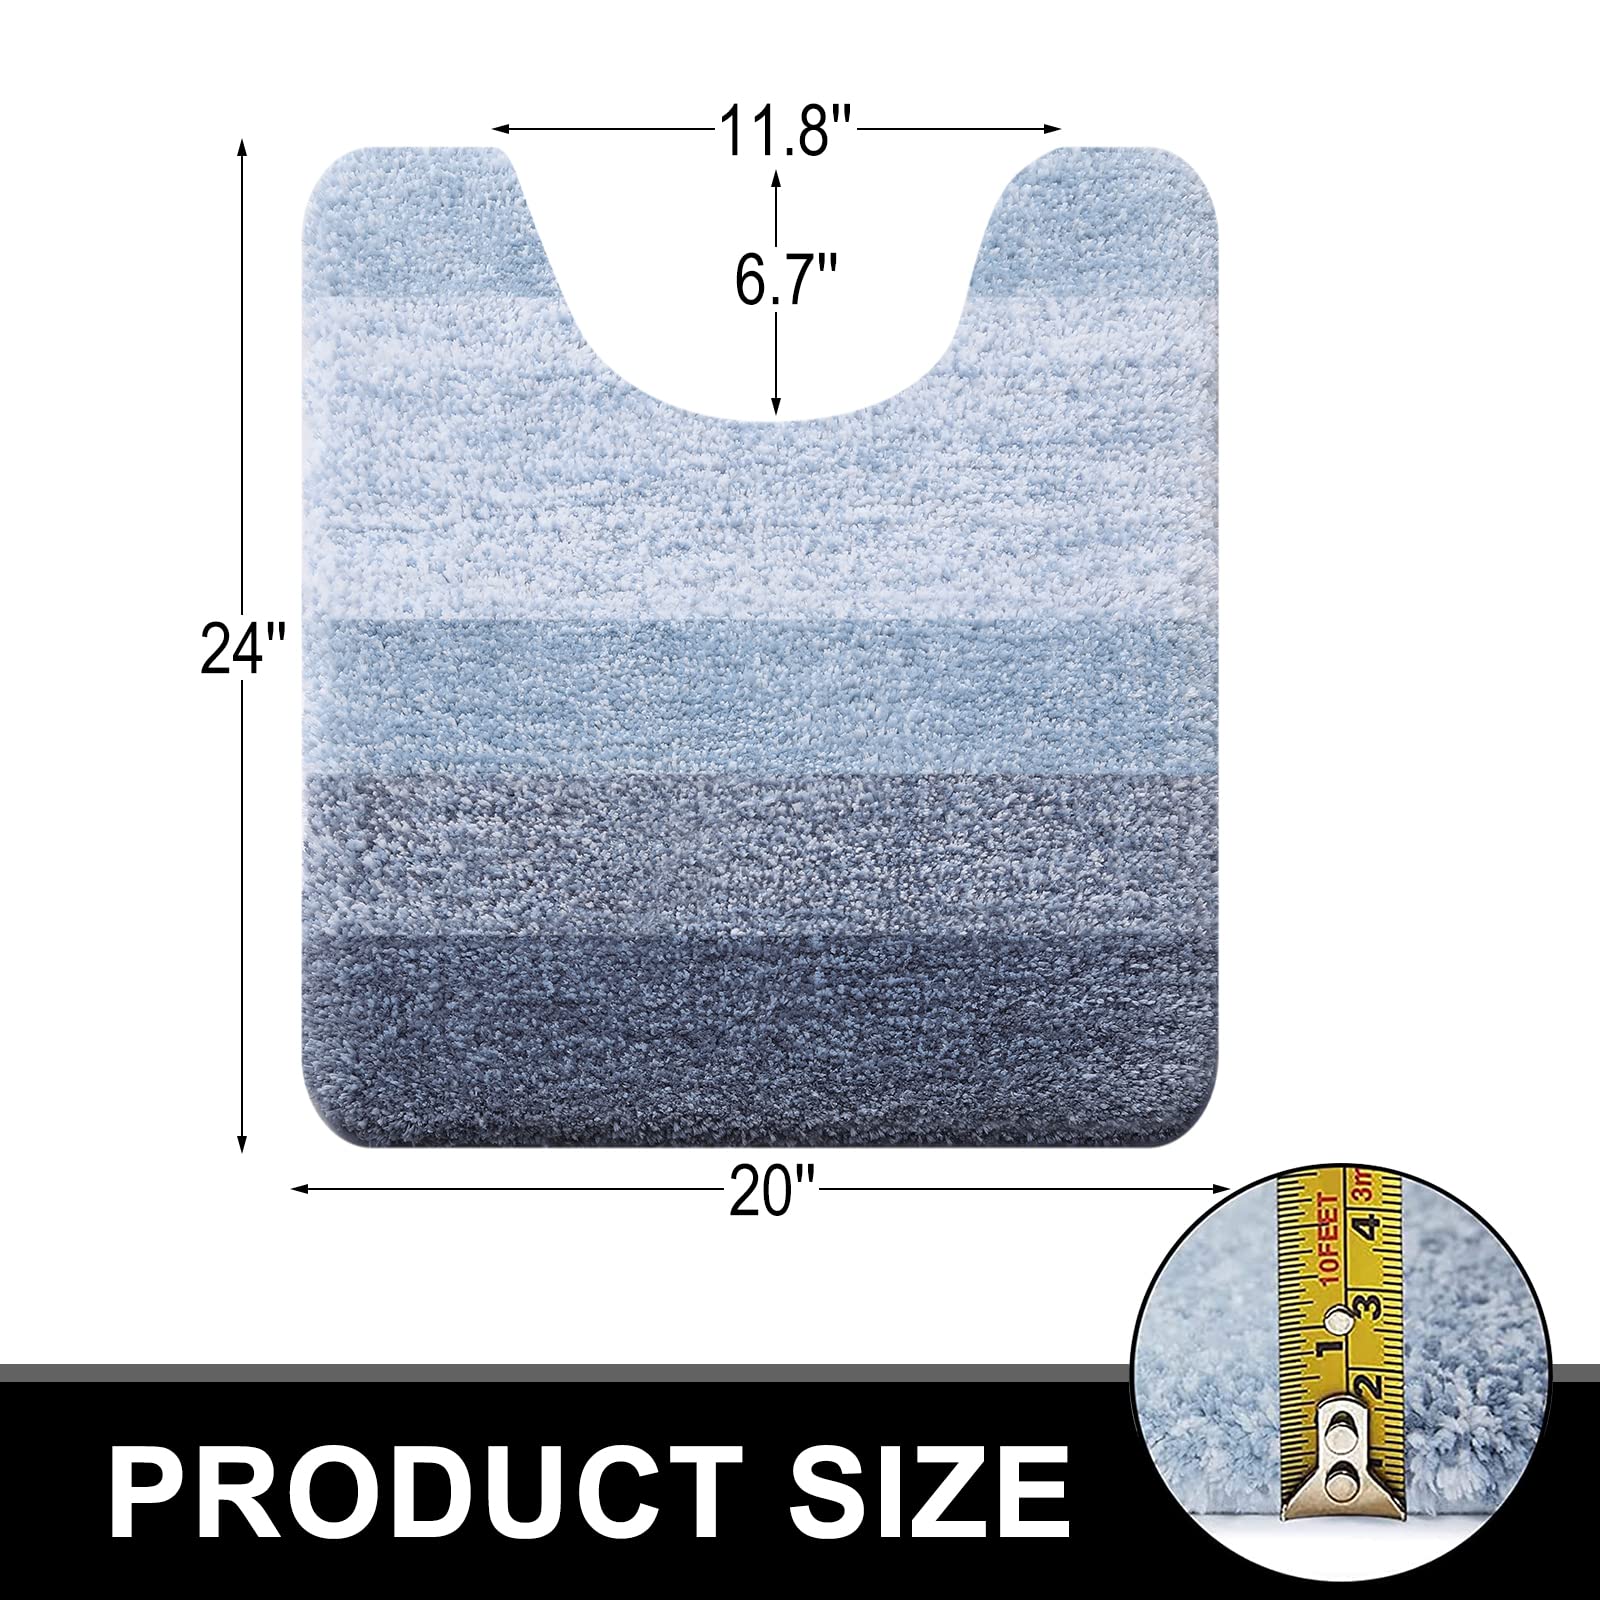 Buganda Luxury U-Shaped Bathroom Rugs, Super Soft and Absorbent Microfiber Toilet Bath Mats, Non-Slip Contour Bathroom Carpets with Rubber Backing, 20X24, Blue - image 2 of 7